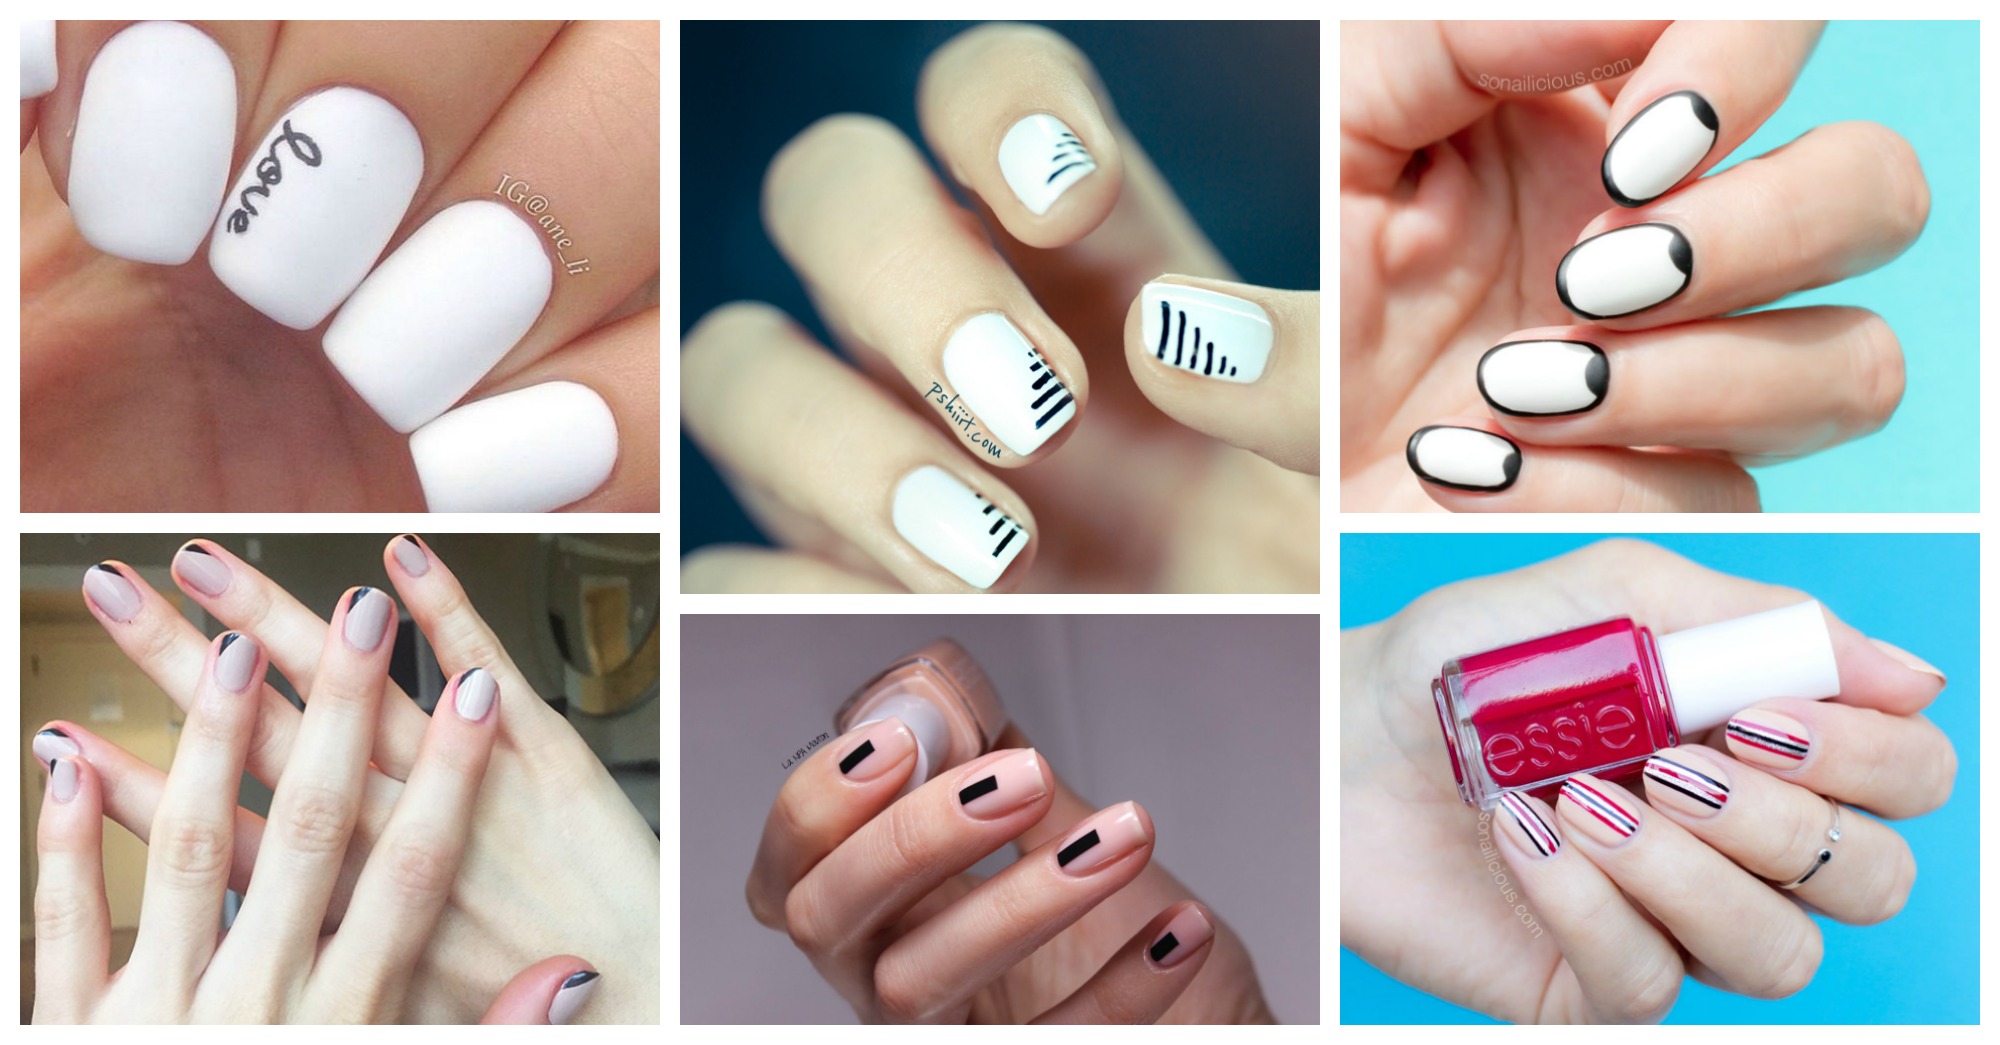 8. Minimalist Nail Designs for a Chic Look - wide 5